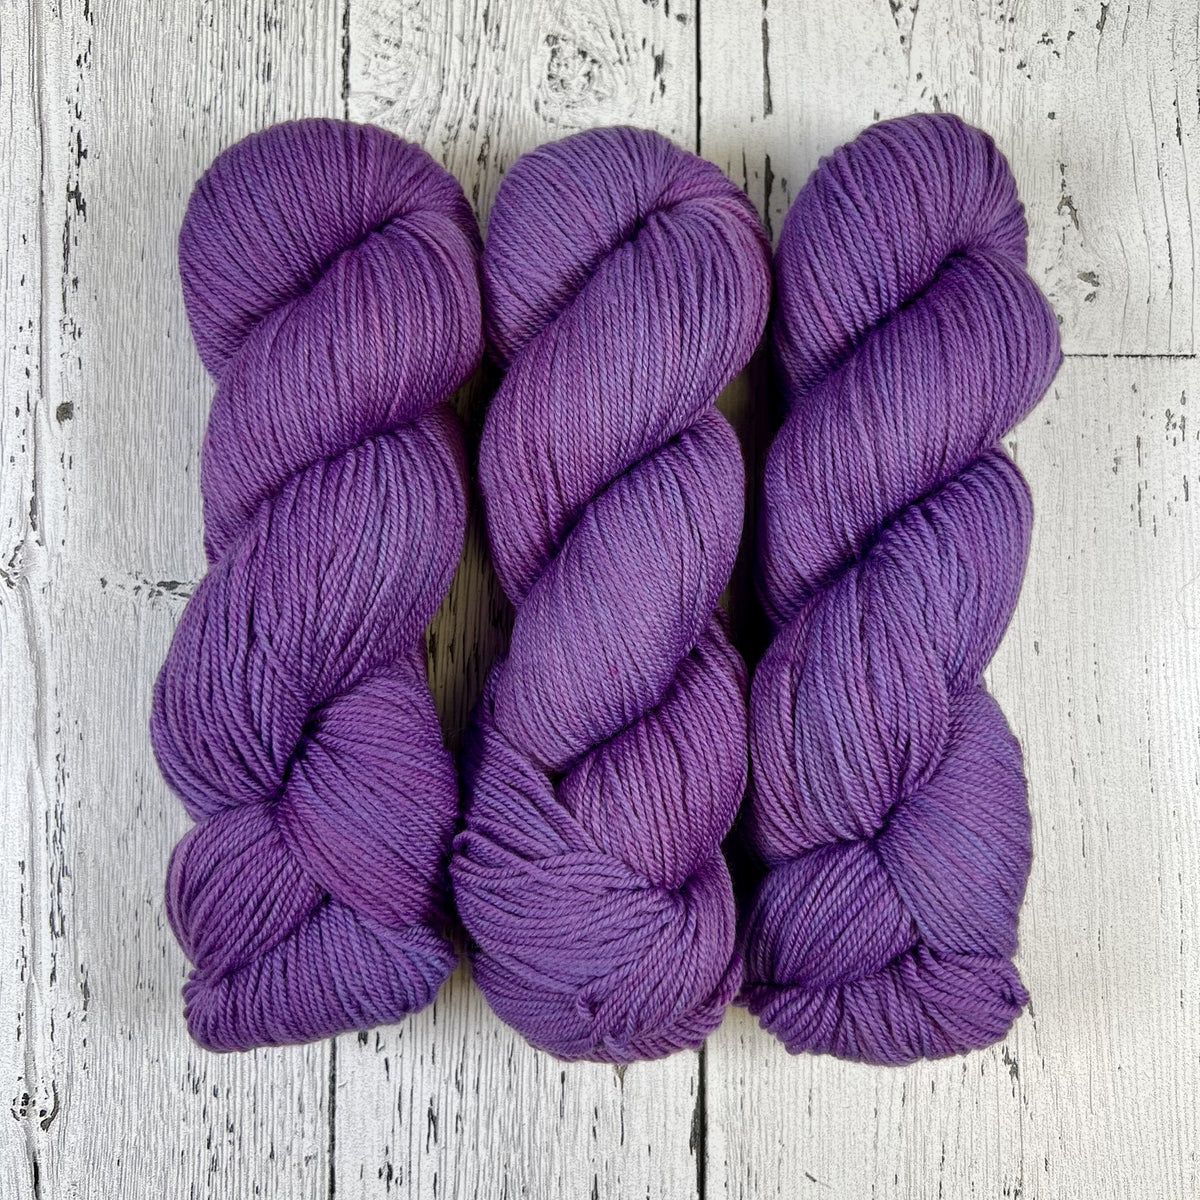 African Violet - Nettle Soft DK - Dyed Stock